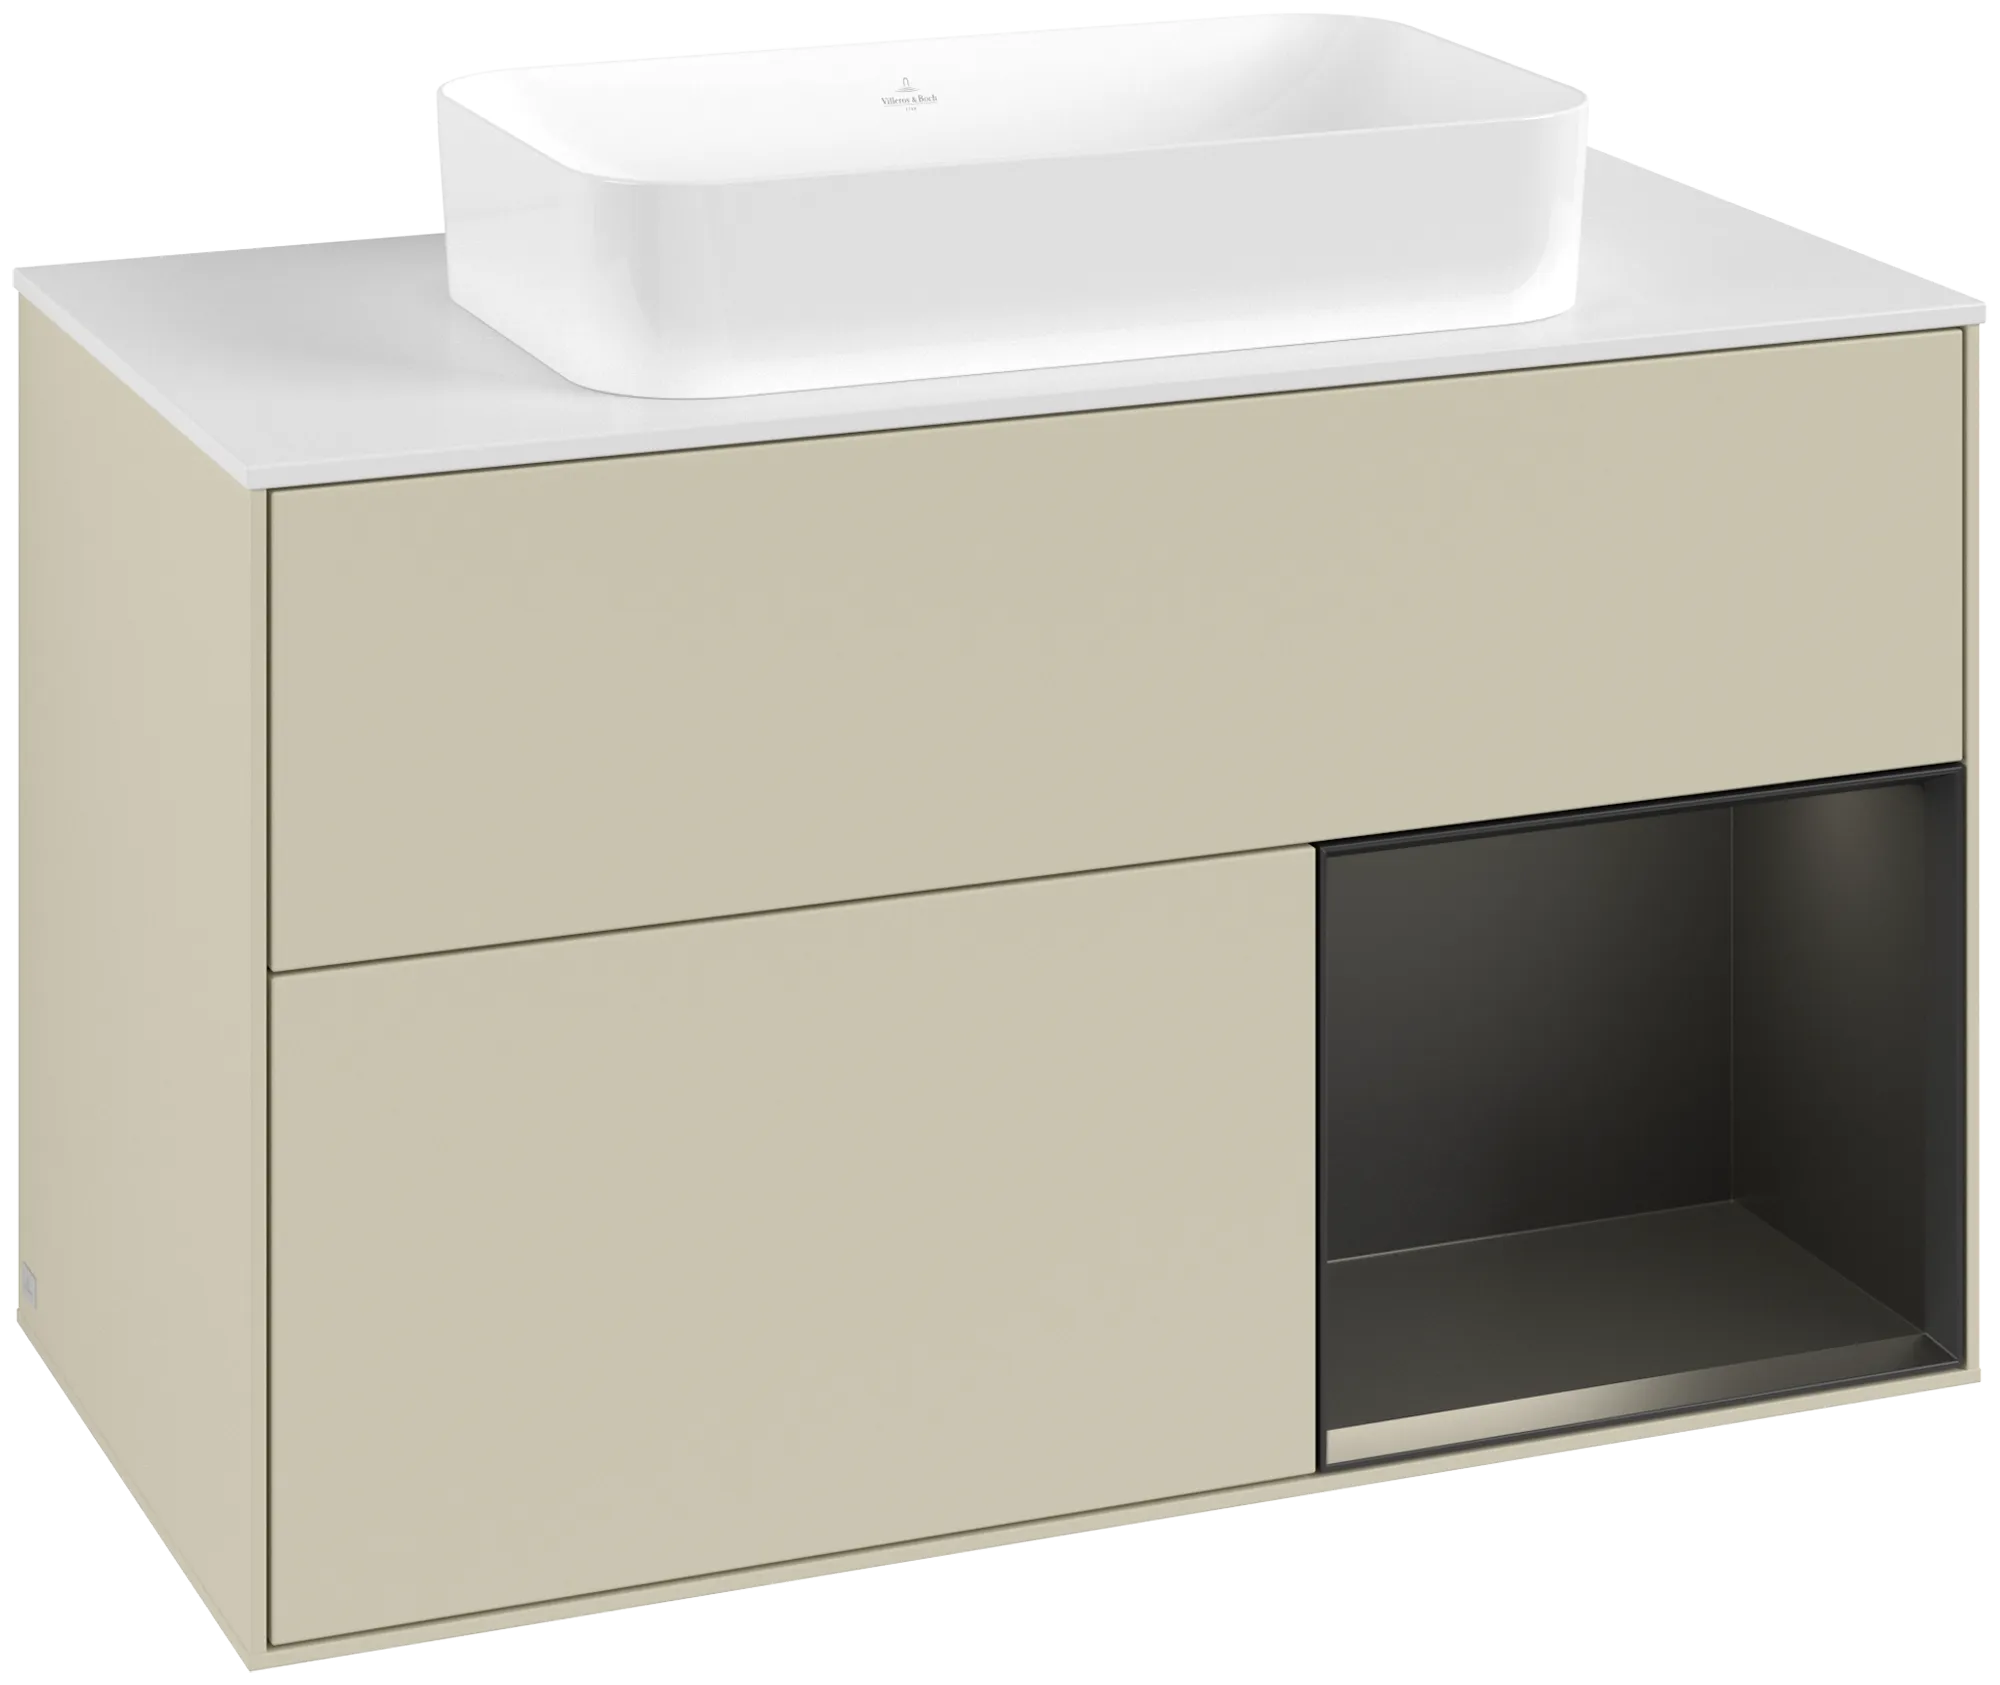 Picture of VILLEROY BOCH Finion Vanity unit, with lighting, 2 pull-out compartments, 1000 x 603 x 501 mm, Silk Grey Matt Lacquer / Black Matt Lacquer / Glass White Matt #G661PDHJ